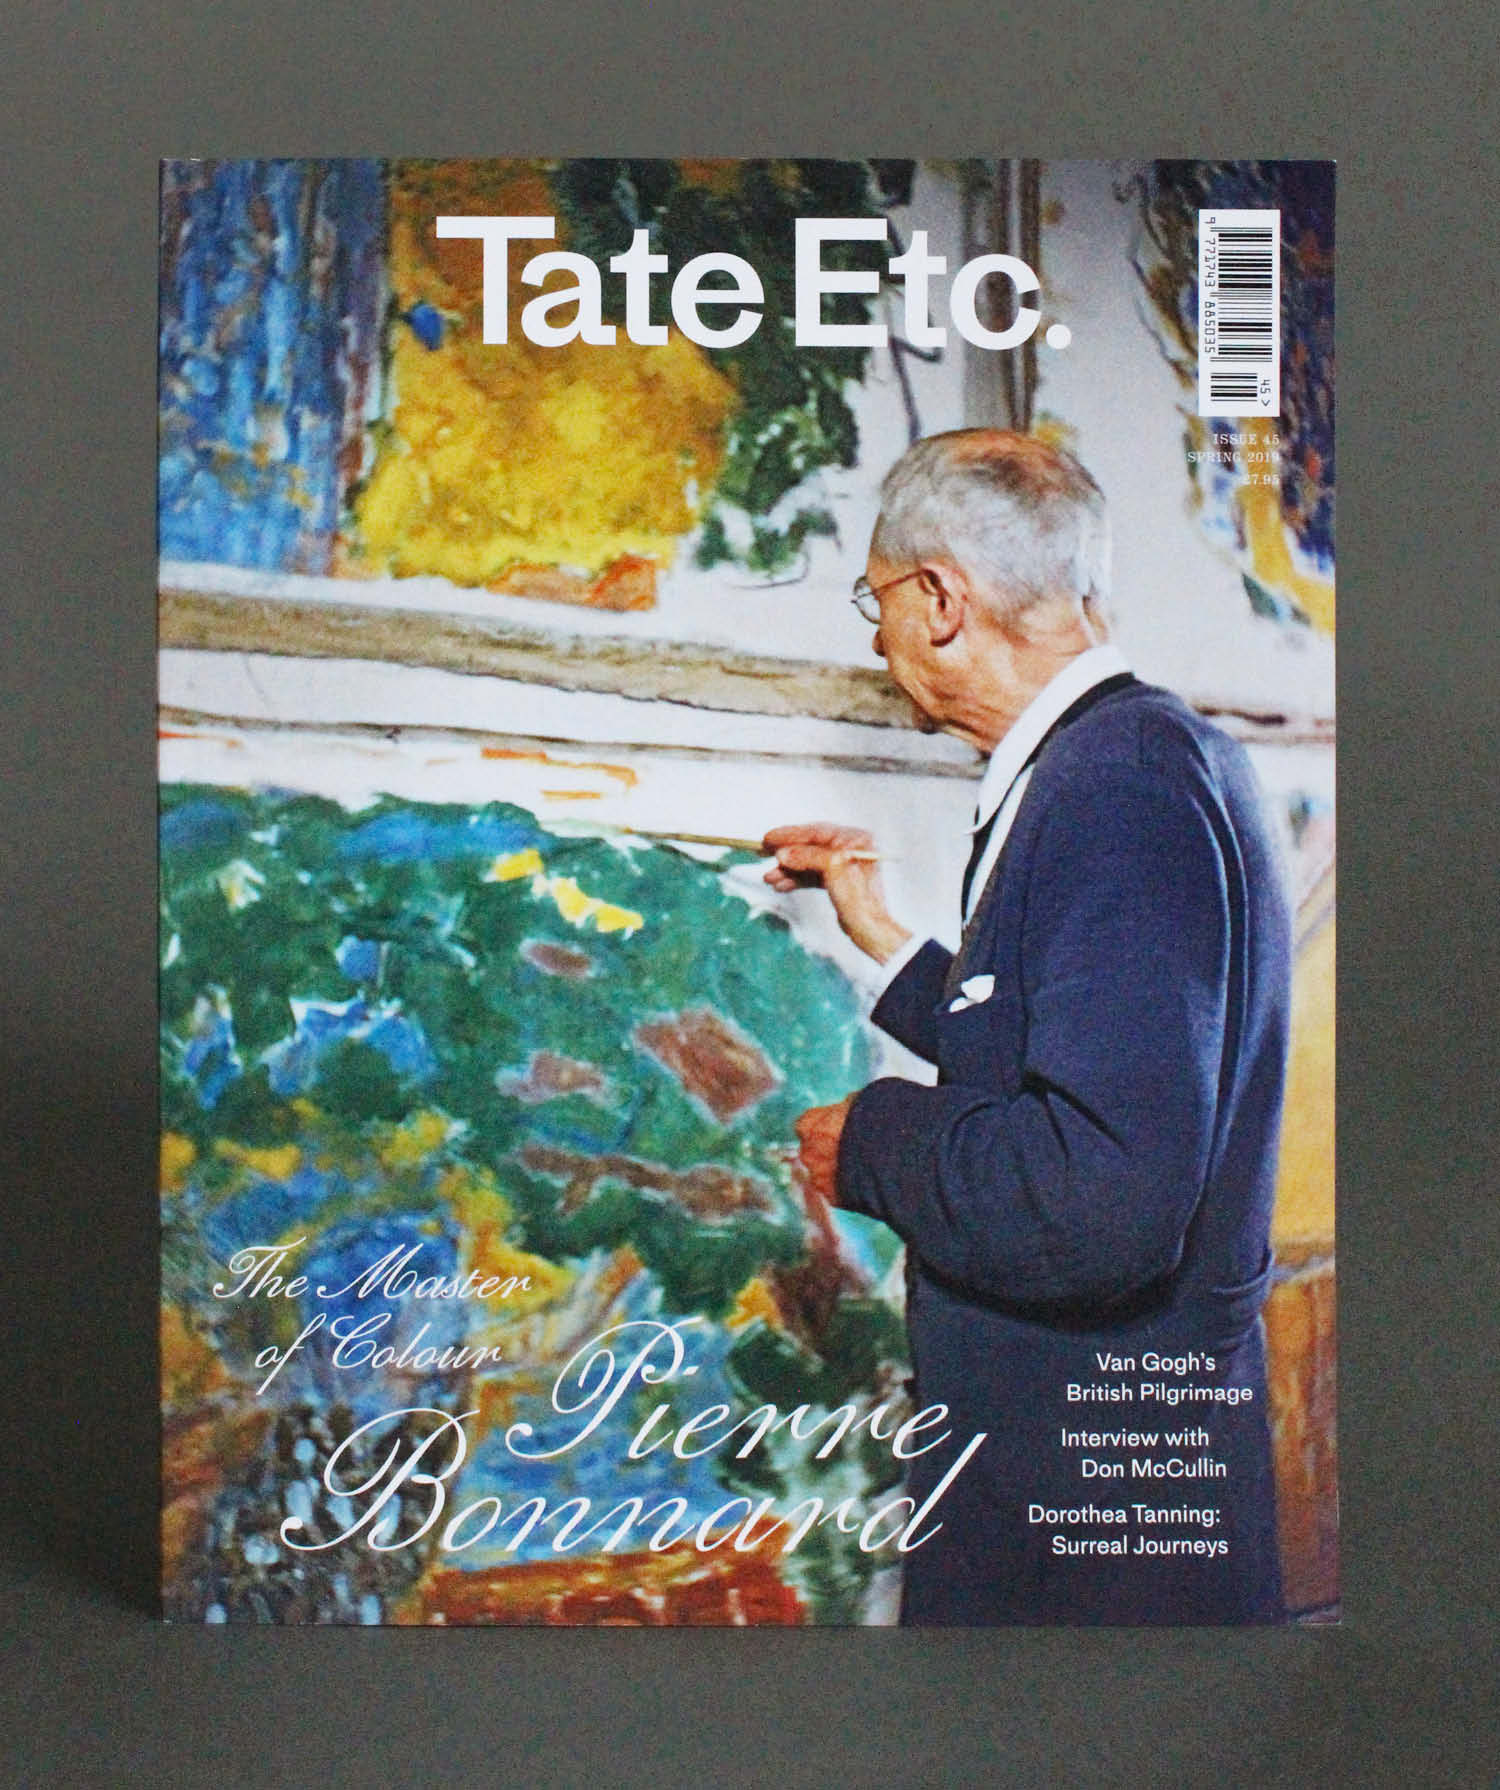 Tate Etc., cover typeface design inspired by Firmin Didot's Anglaise